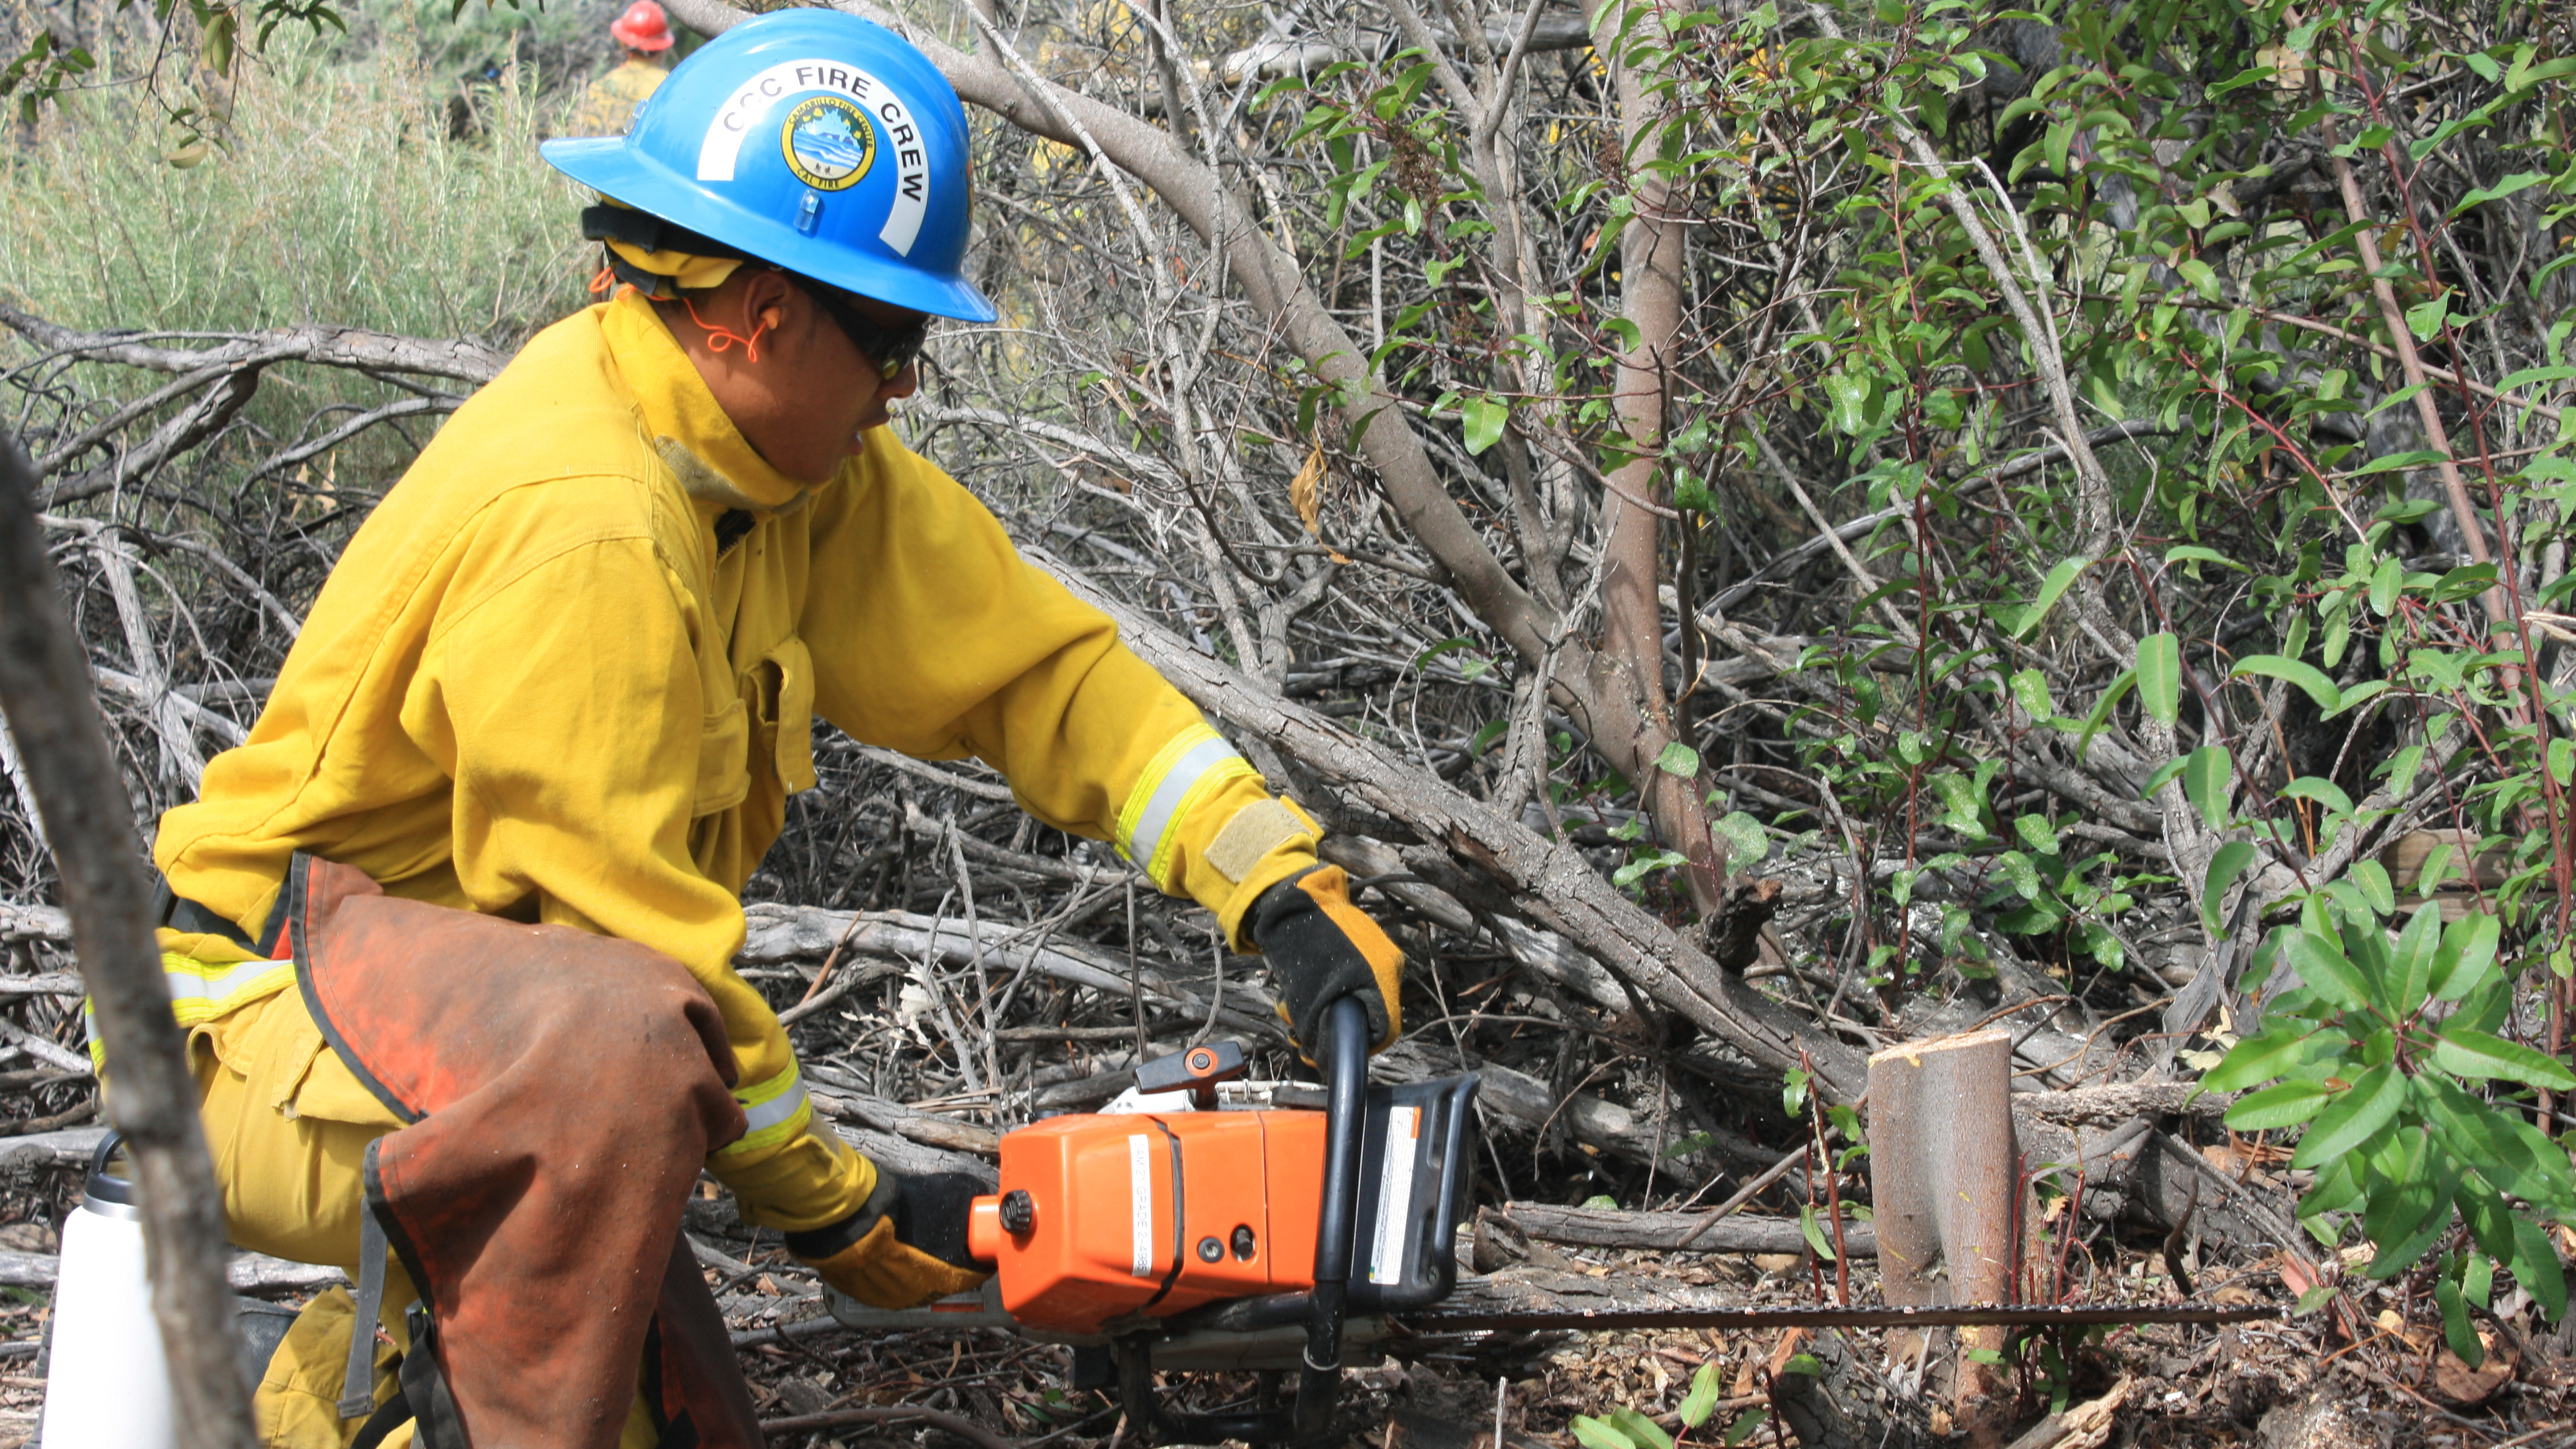 Corpsmember in full wildland fire apparel drops his left knee to the ground to use a chain saw to cut brush at ground level.